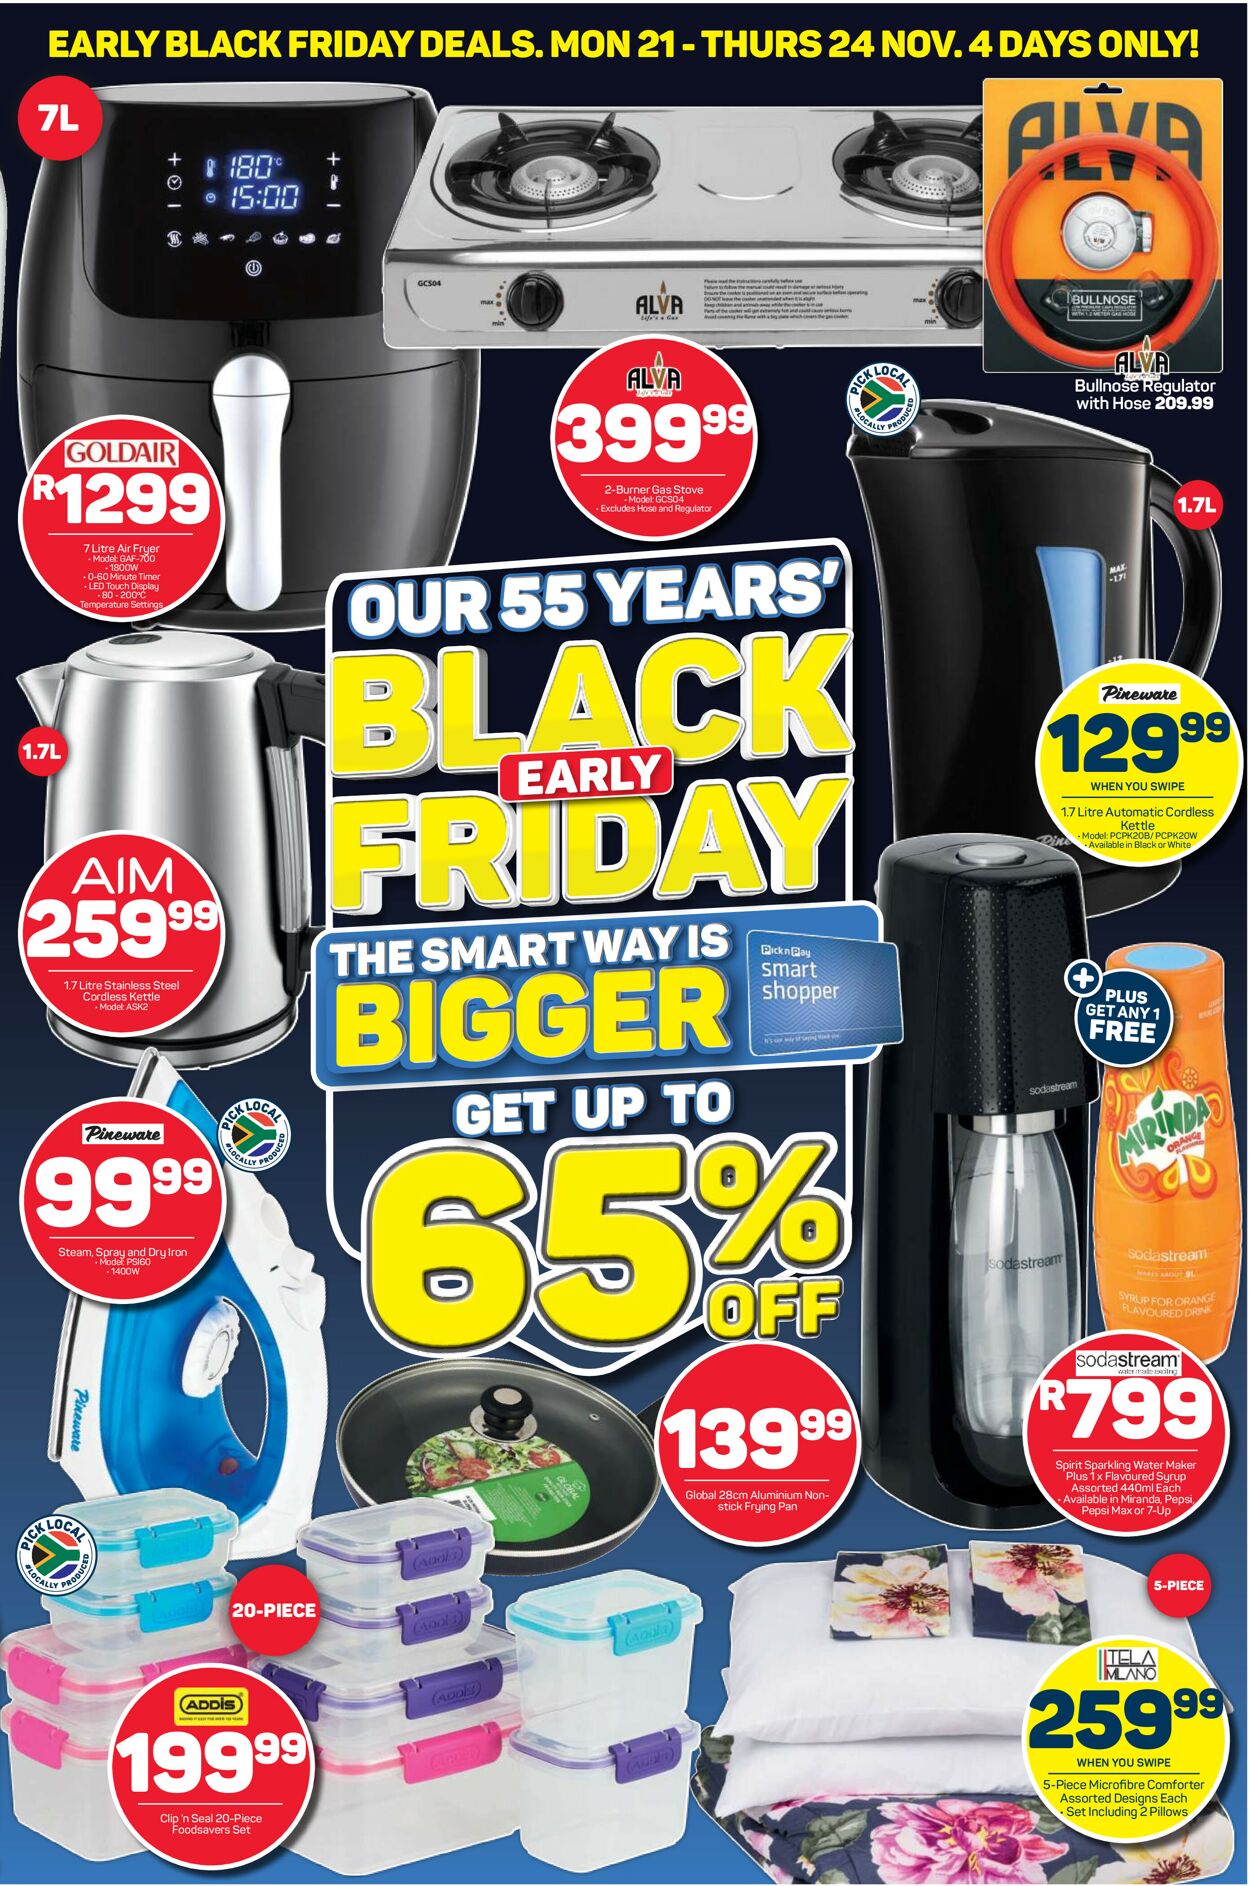 Pick n Pay Catalogue from 2022/11/20